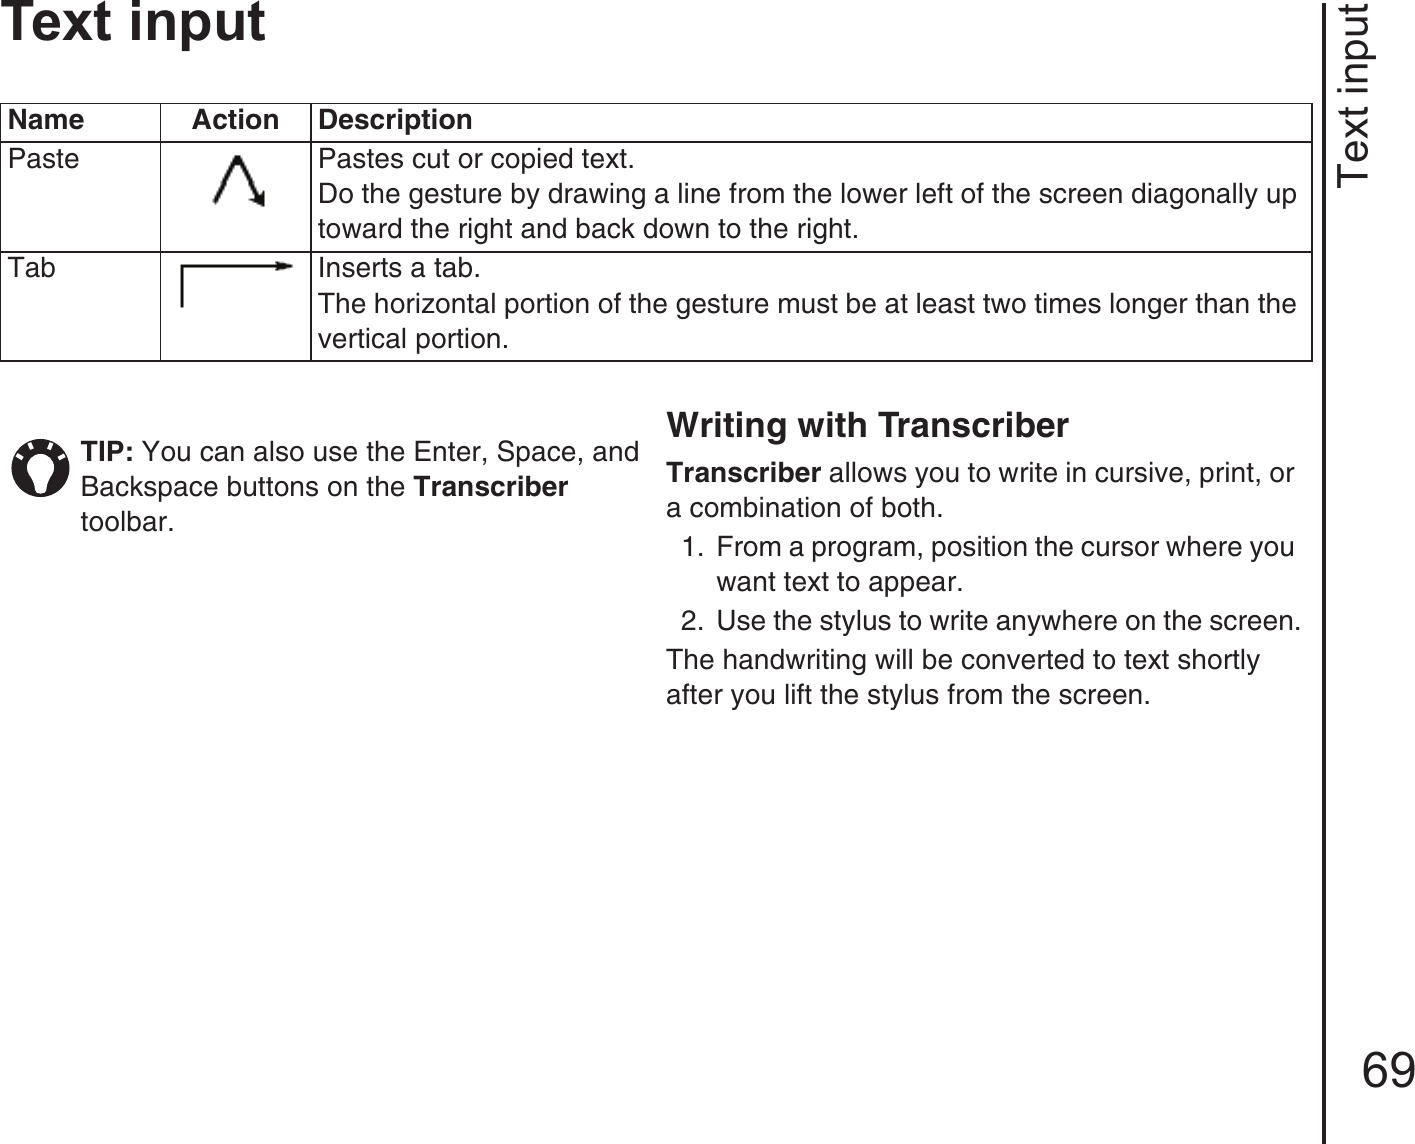 Text input69Text inputWriting with TranscriberTranscriber allows you to write in cursive, print, or a combination of both.1.  From a program, position the cursor where you want text to appear.2.  Use the stylus to write anywhere on the screen.The handwriting will be converted to text shortly after you lift the stylus from the screen.Name Action DescriptionPaste Pastes cut or copied text.Do the gesture by drawing a line from the lower left of the screen diagonally up toward the right and back down to the right.Tab Inserts a tab.The horizontal portion of the gesture must be at least two times longer than the vertical portion.TIP: You can also use the Enter, Space, and Backspace buttons on the Transcriber toolbar.